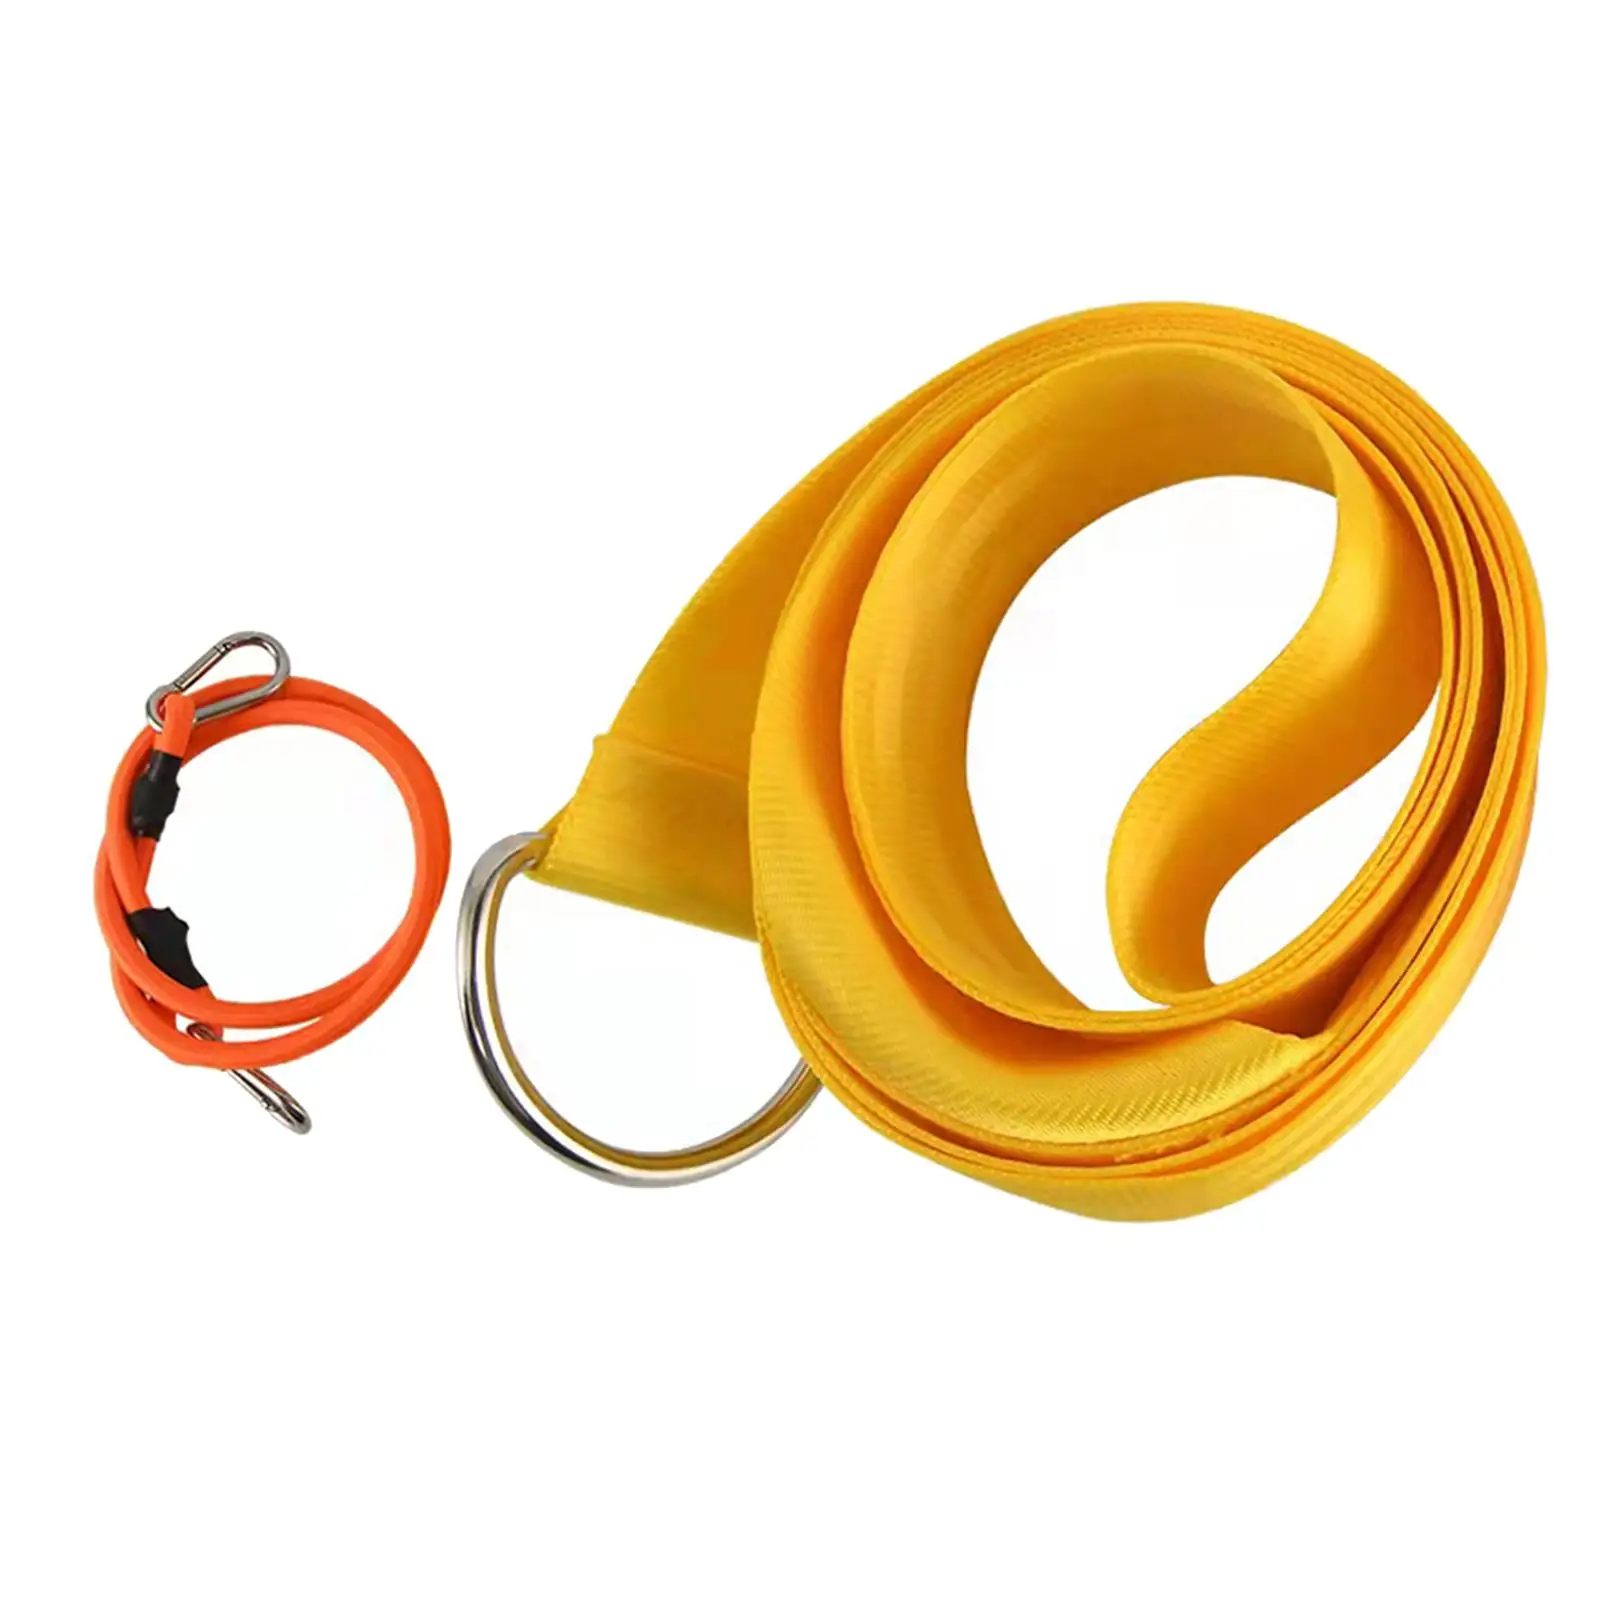 Tennis Trainer Belt Swing Practice Rotating Power for Volleyball Basketball